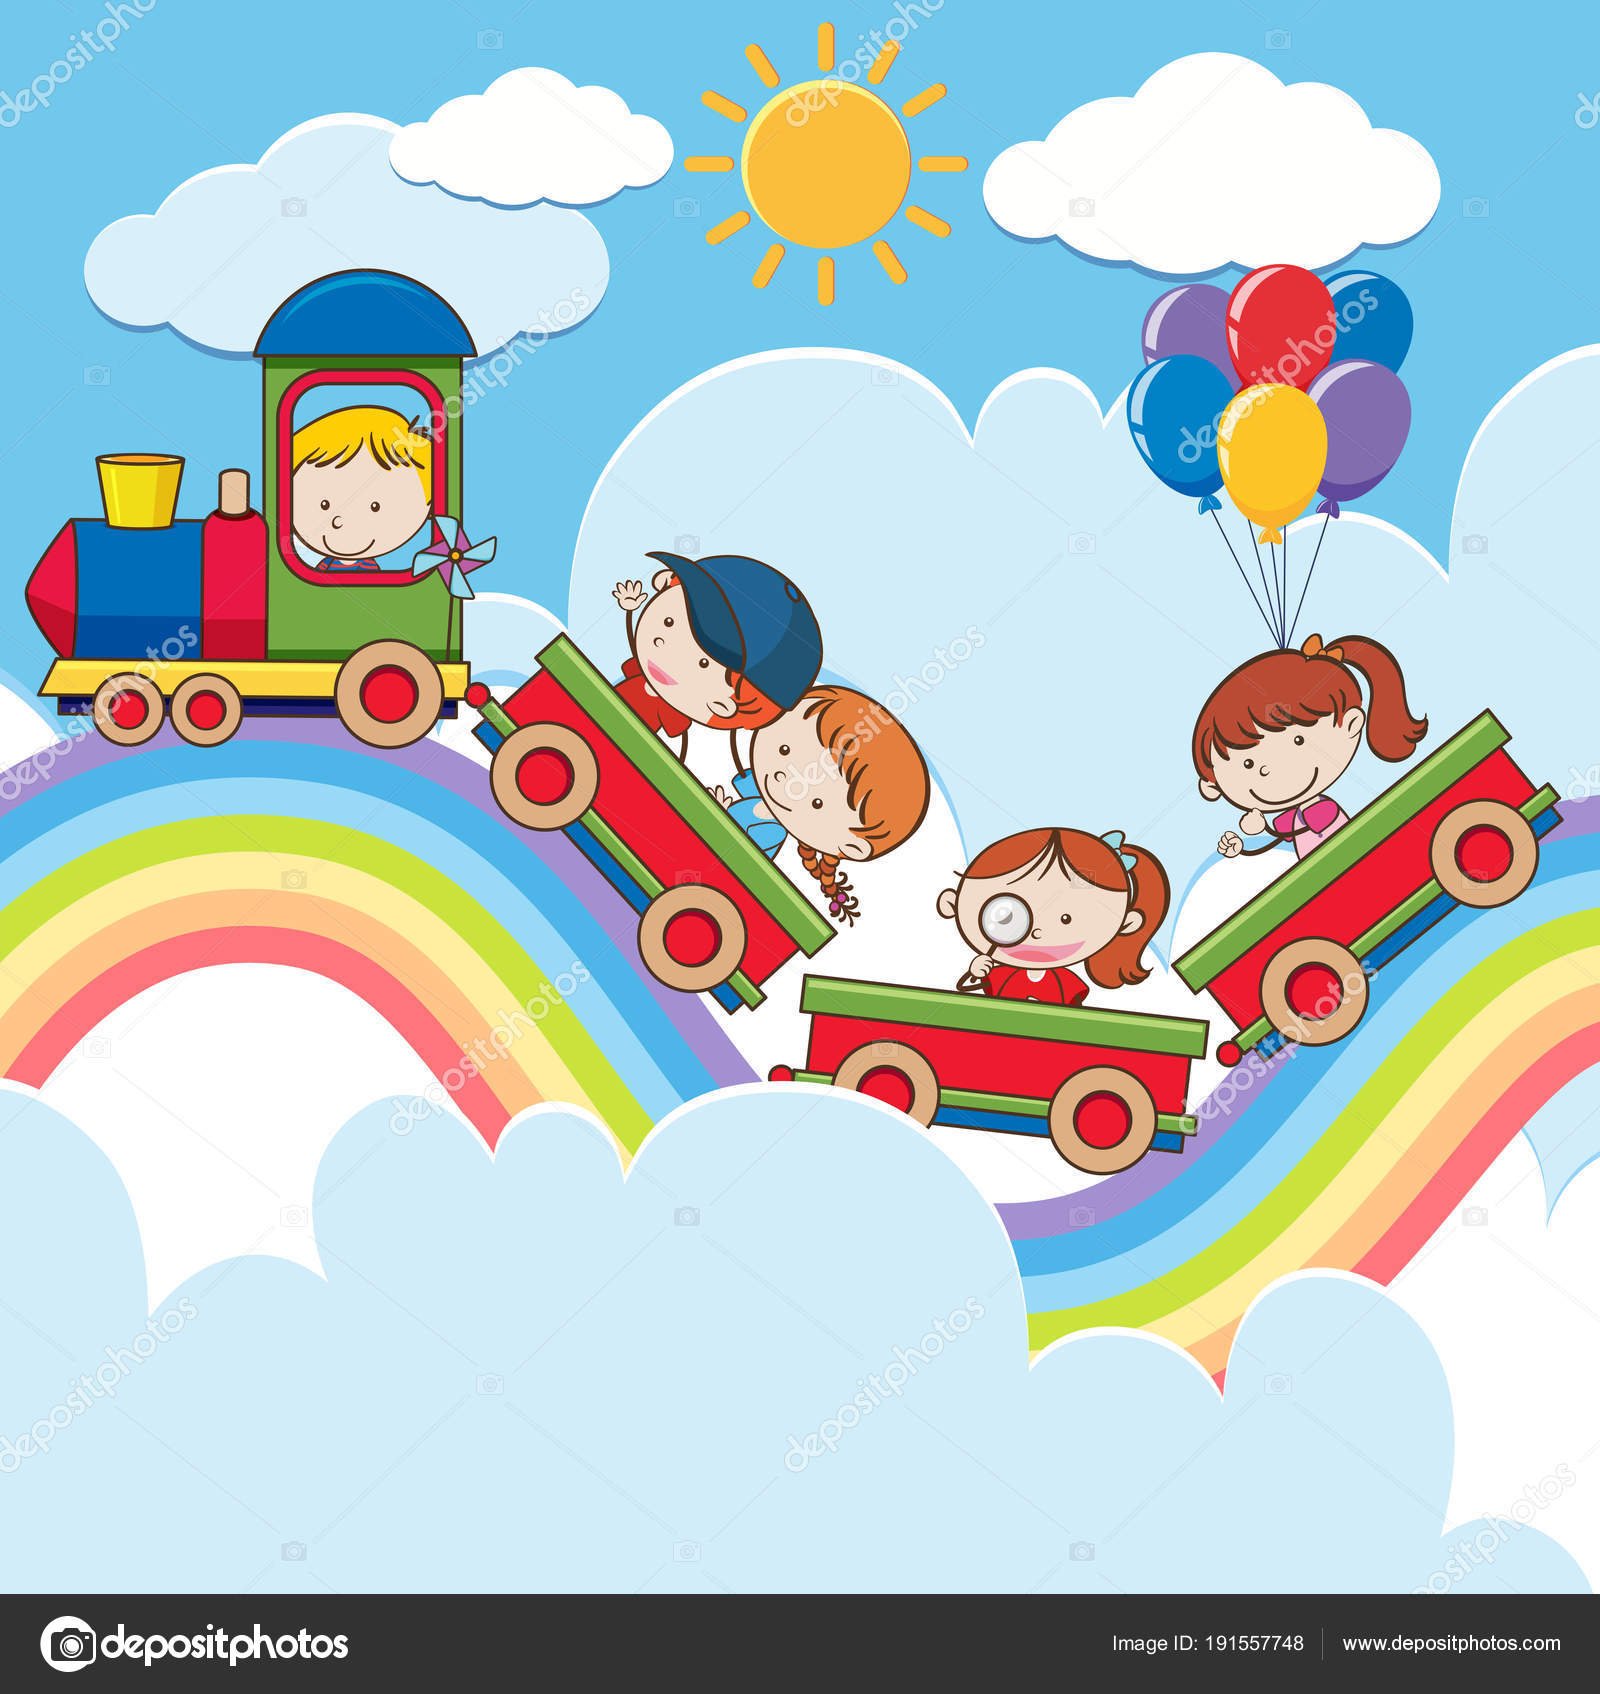 Kids On Train On Rainbow Road Vector Image By C Brgfx Vector Stock